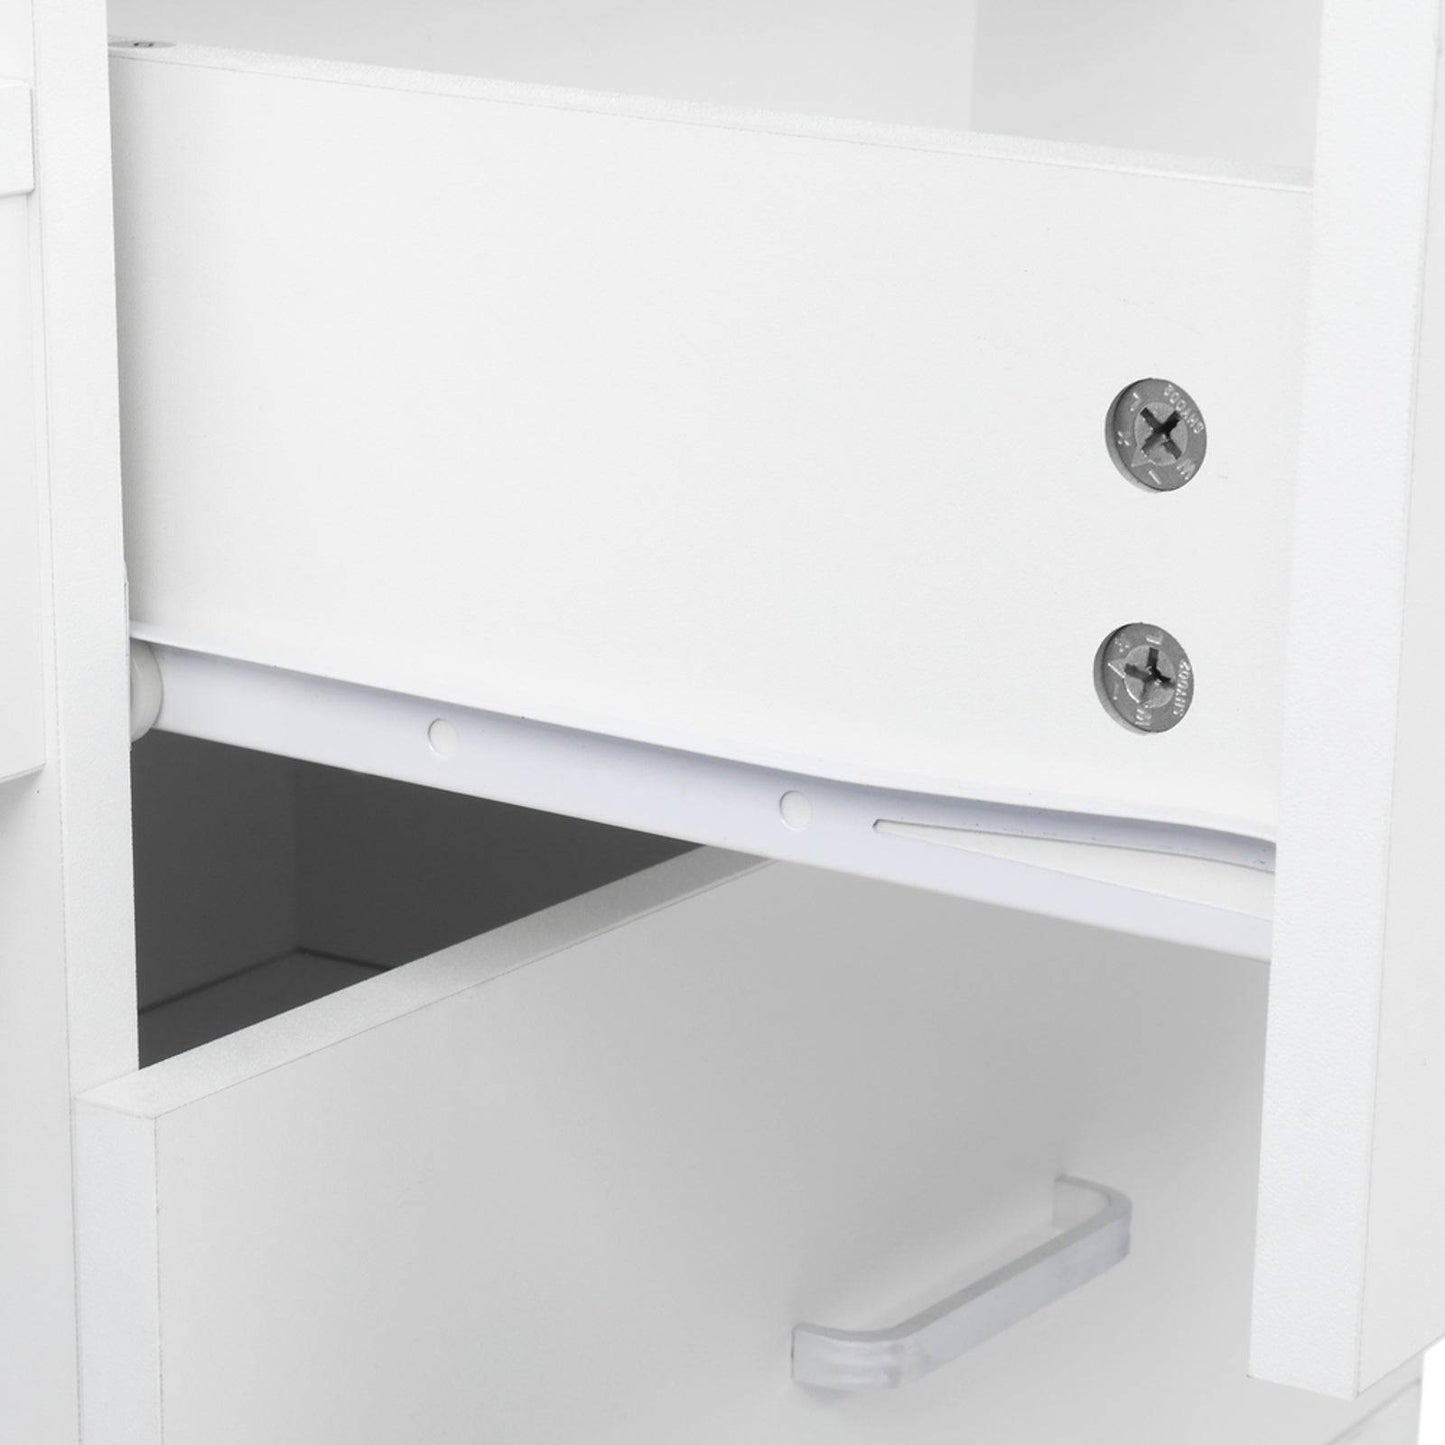 Pitted surface 2 drawers 1 door 6 hair dryer double ear cabinet